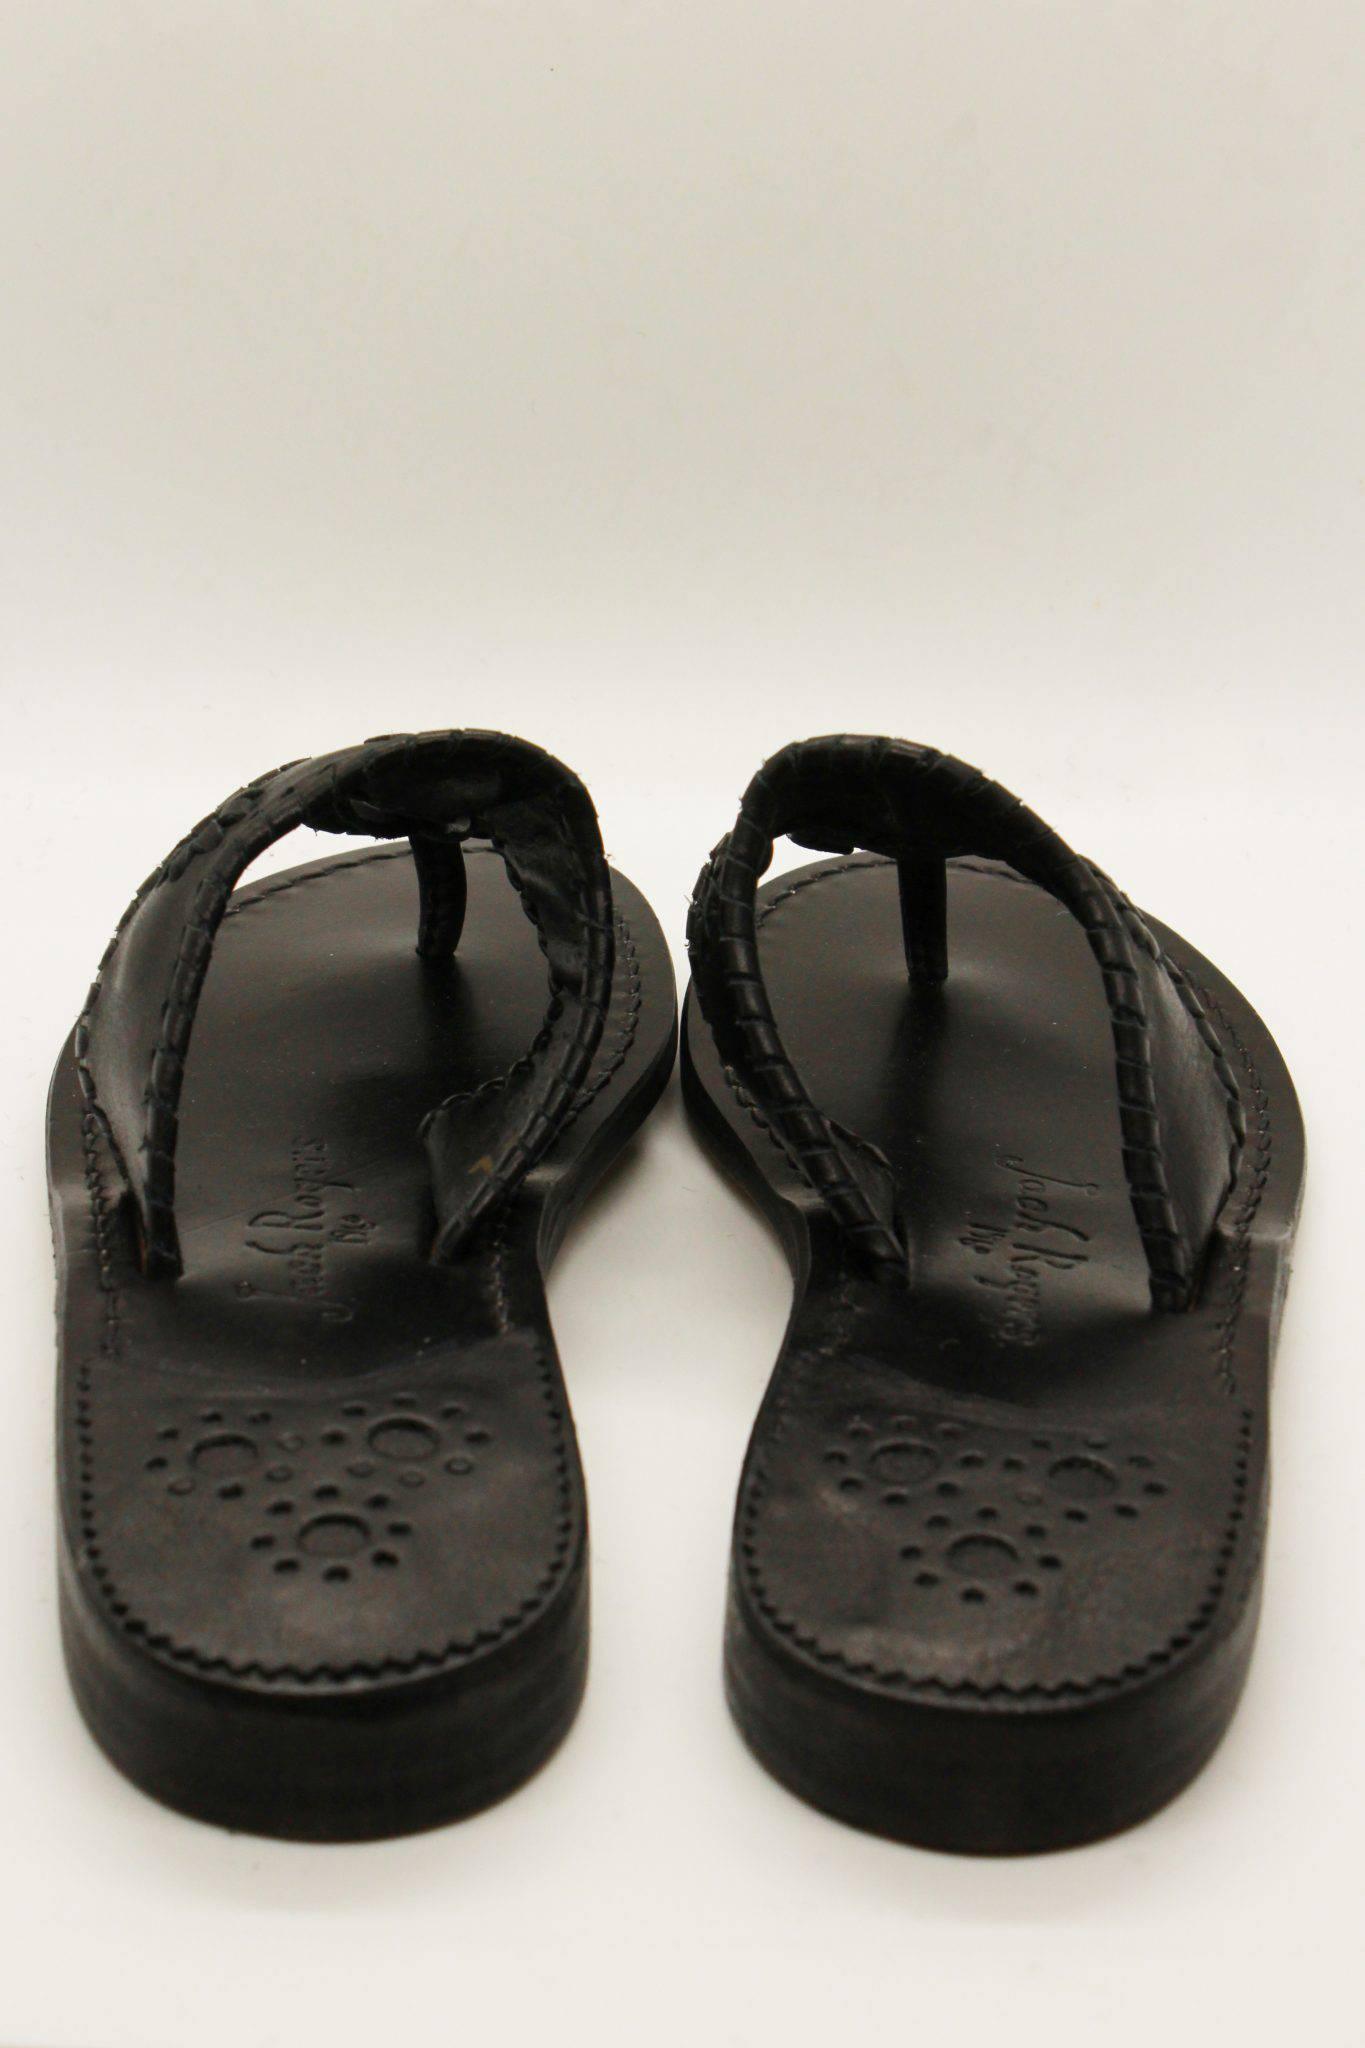 back view of Classic style Jack Rogers Sandal in a black stained leather